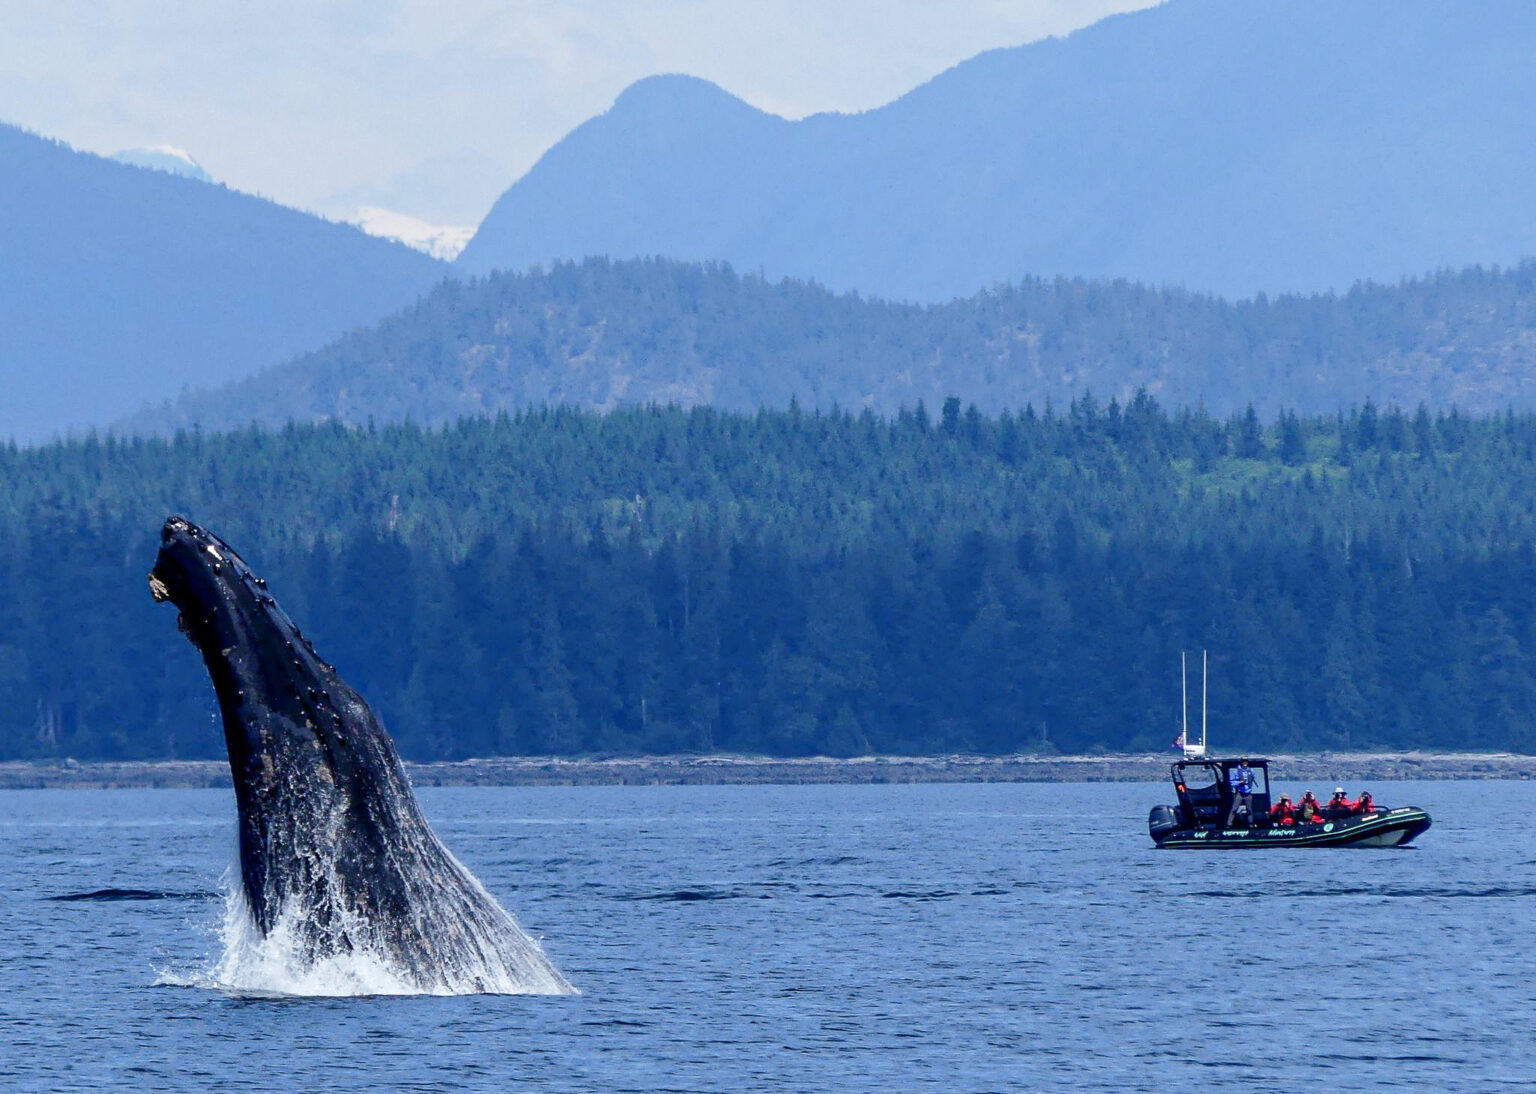 Breaching Humpback Whale in foreground with Wild Waterways Advenutre's zodiac in the background